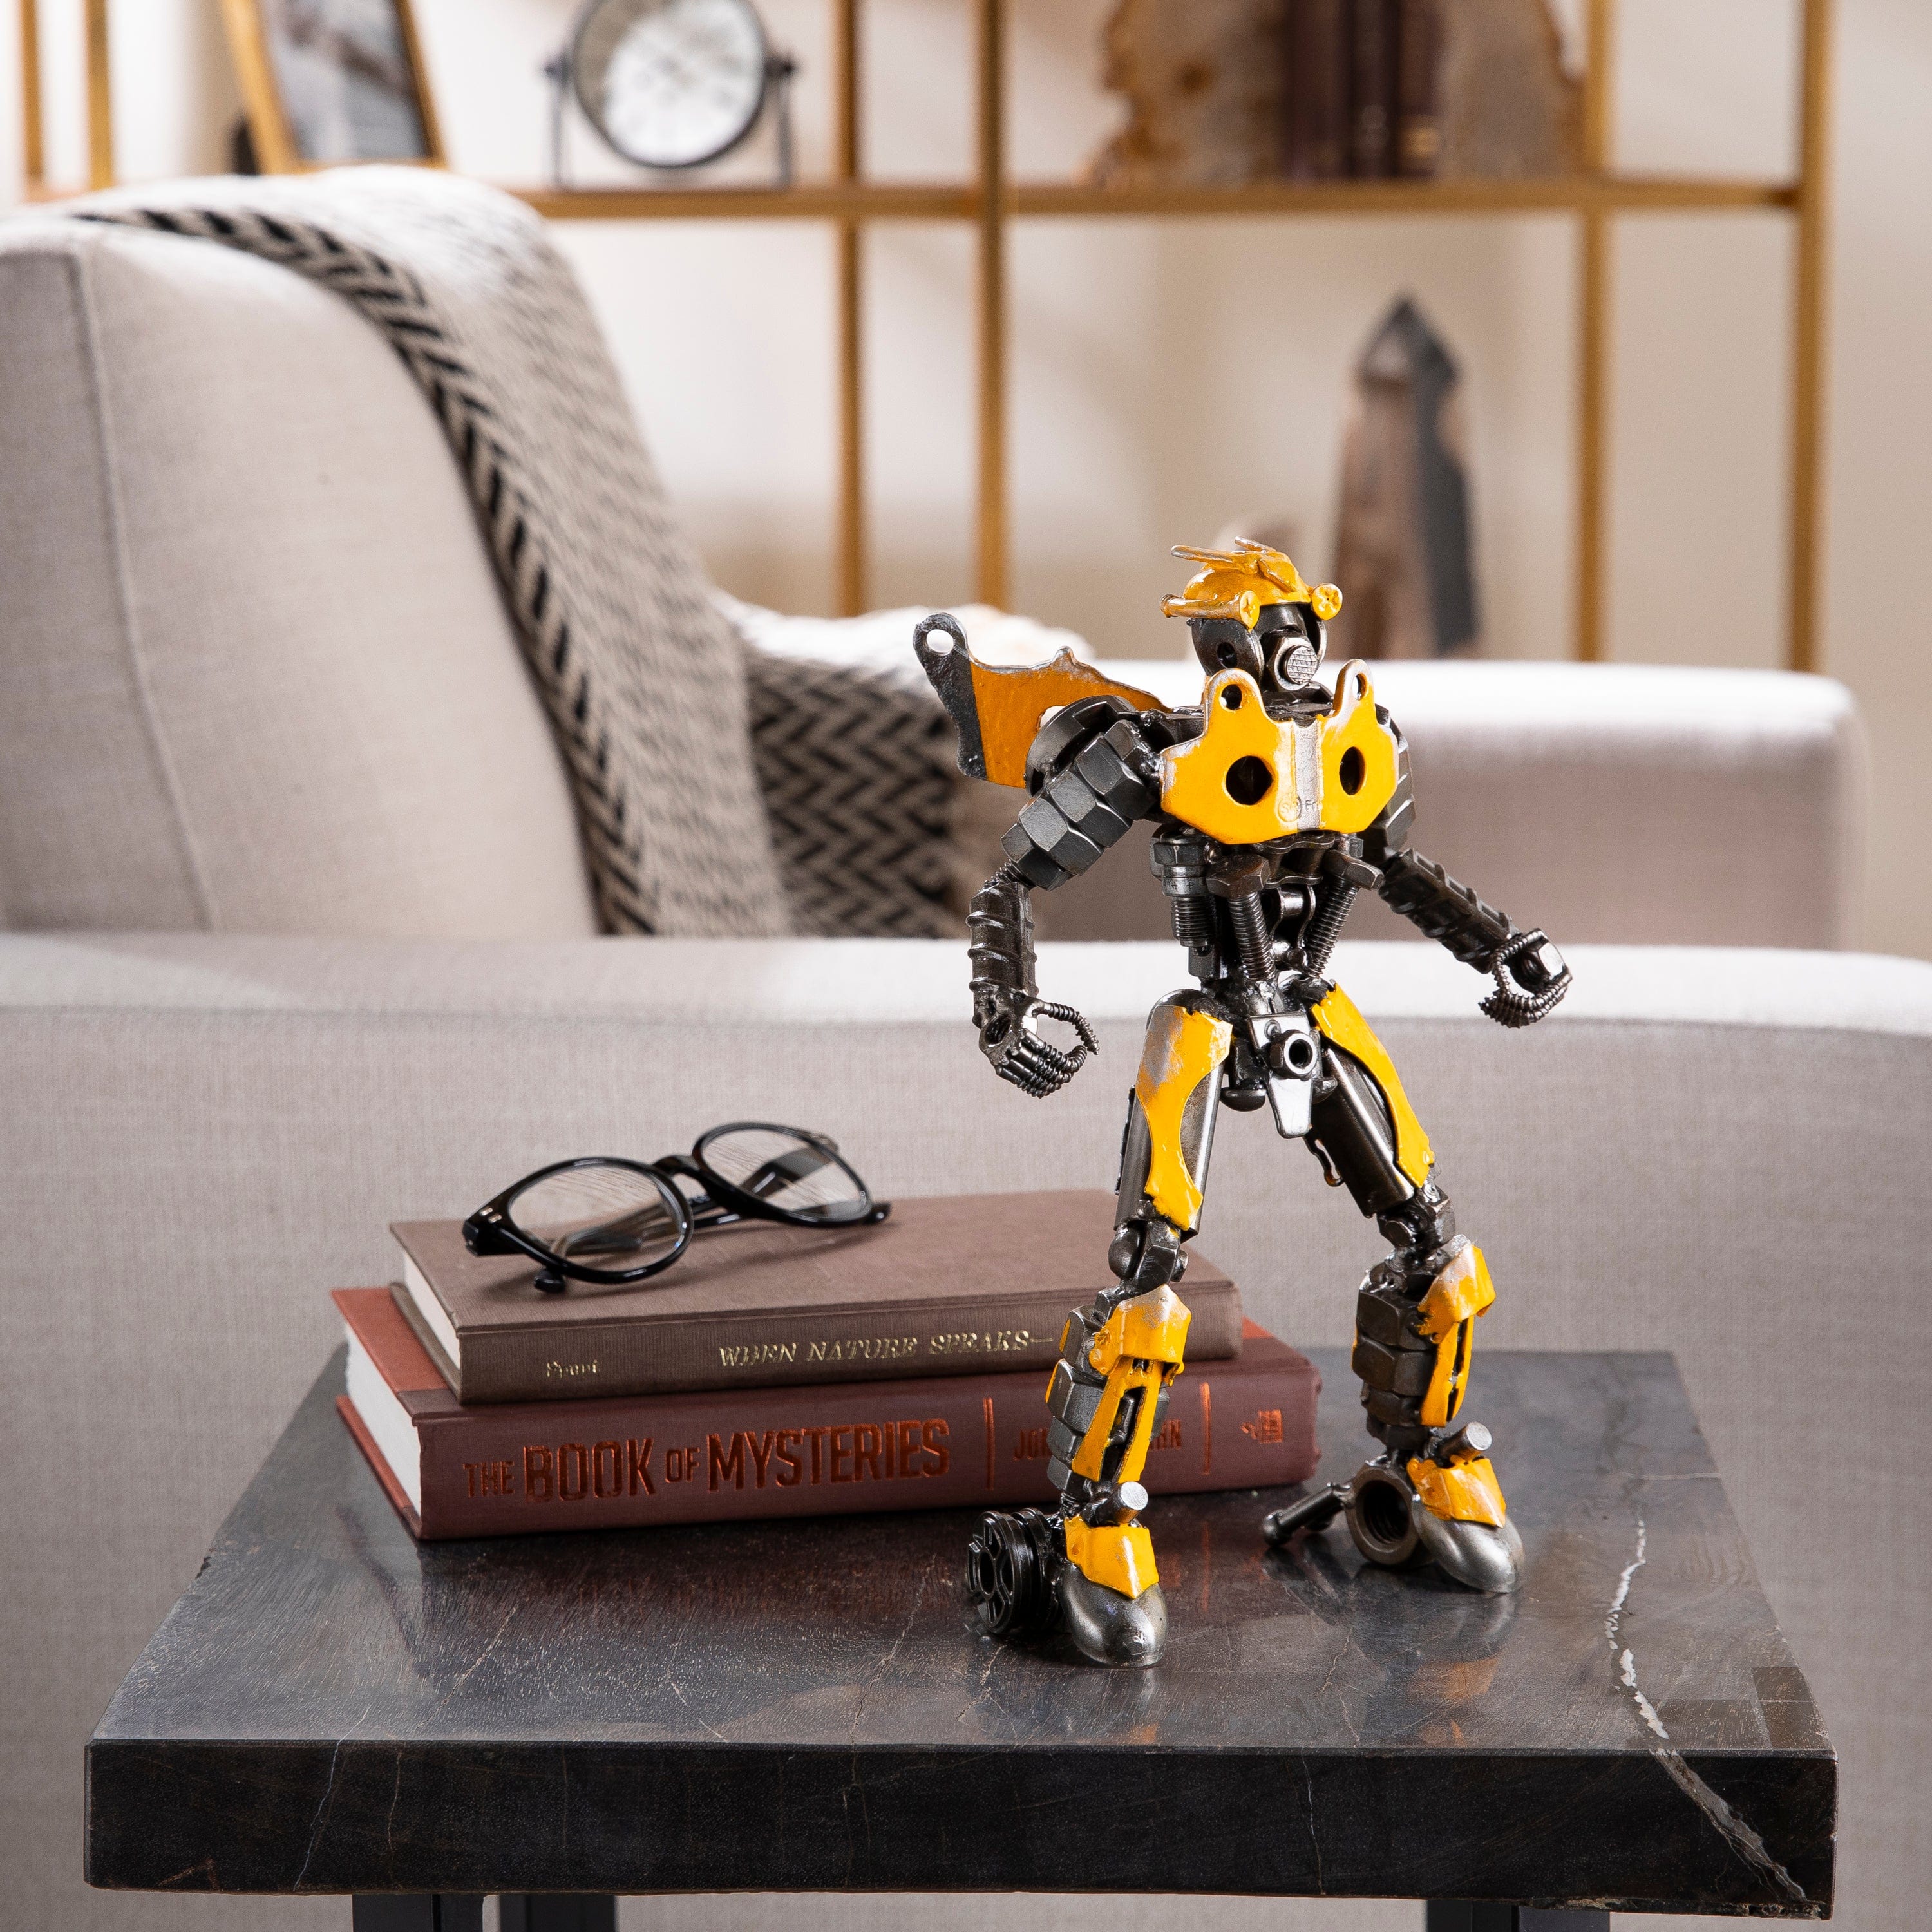 Kalifano Recycled Metal Art BumbleBee Inspired Recycled Metal Sculpture RMS-700BBA-N